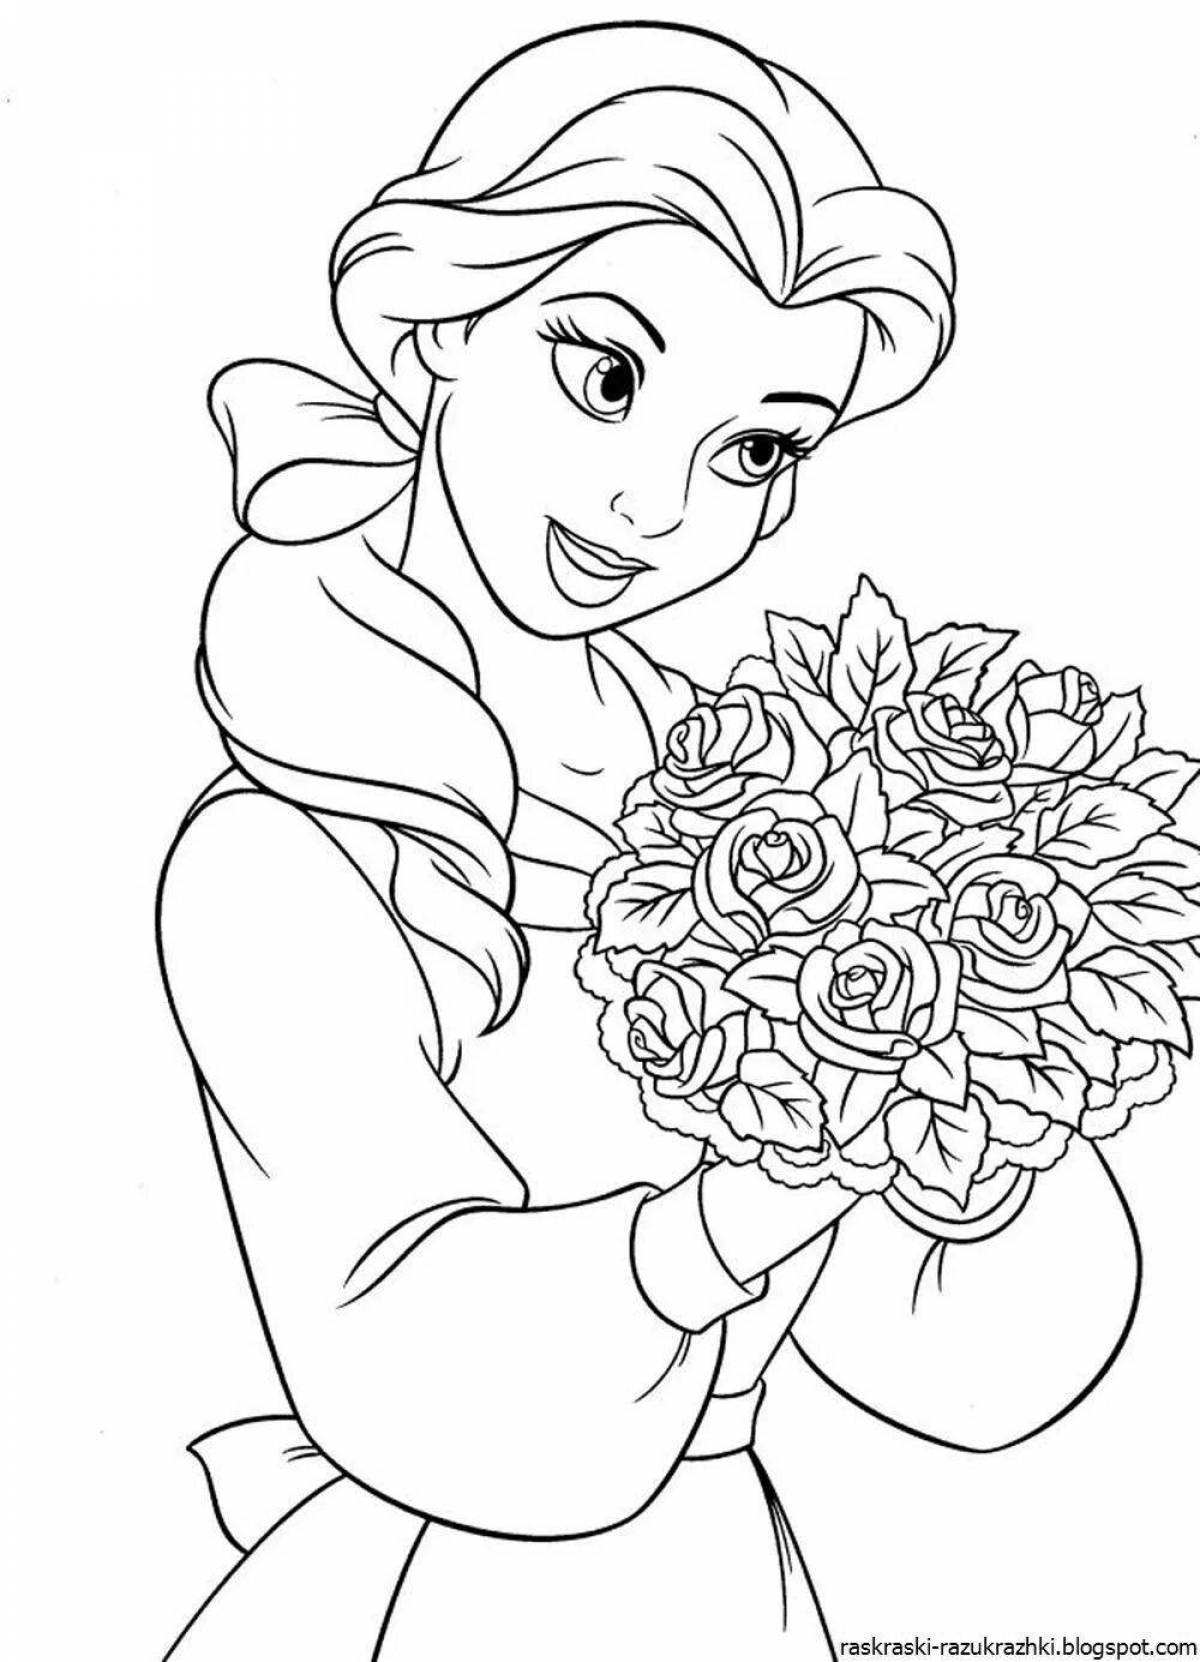 Awesome video coloring pages for girls